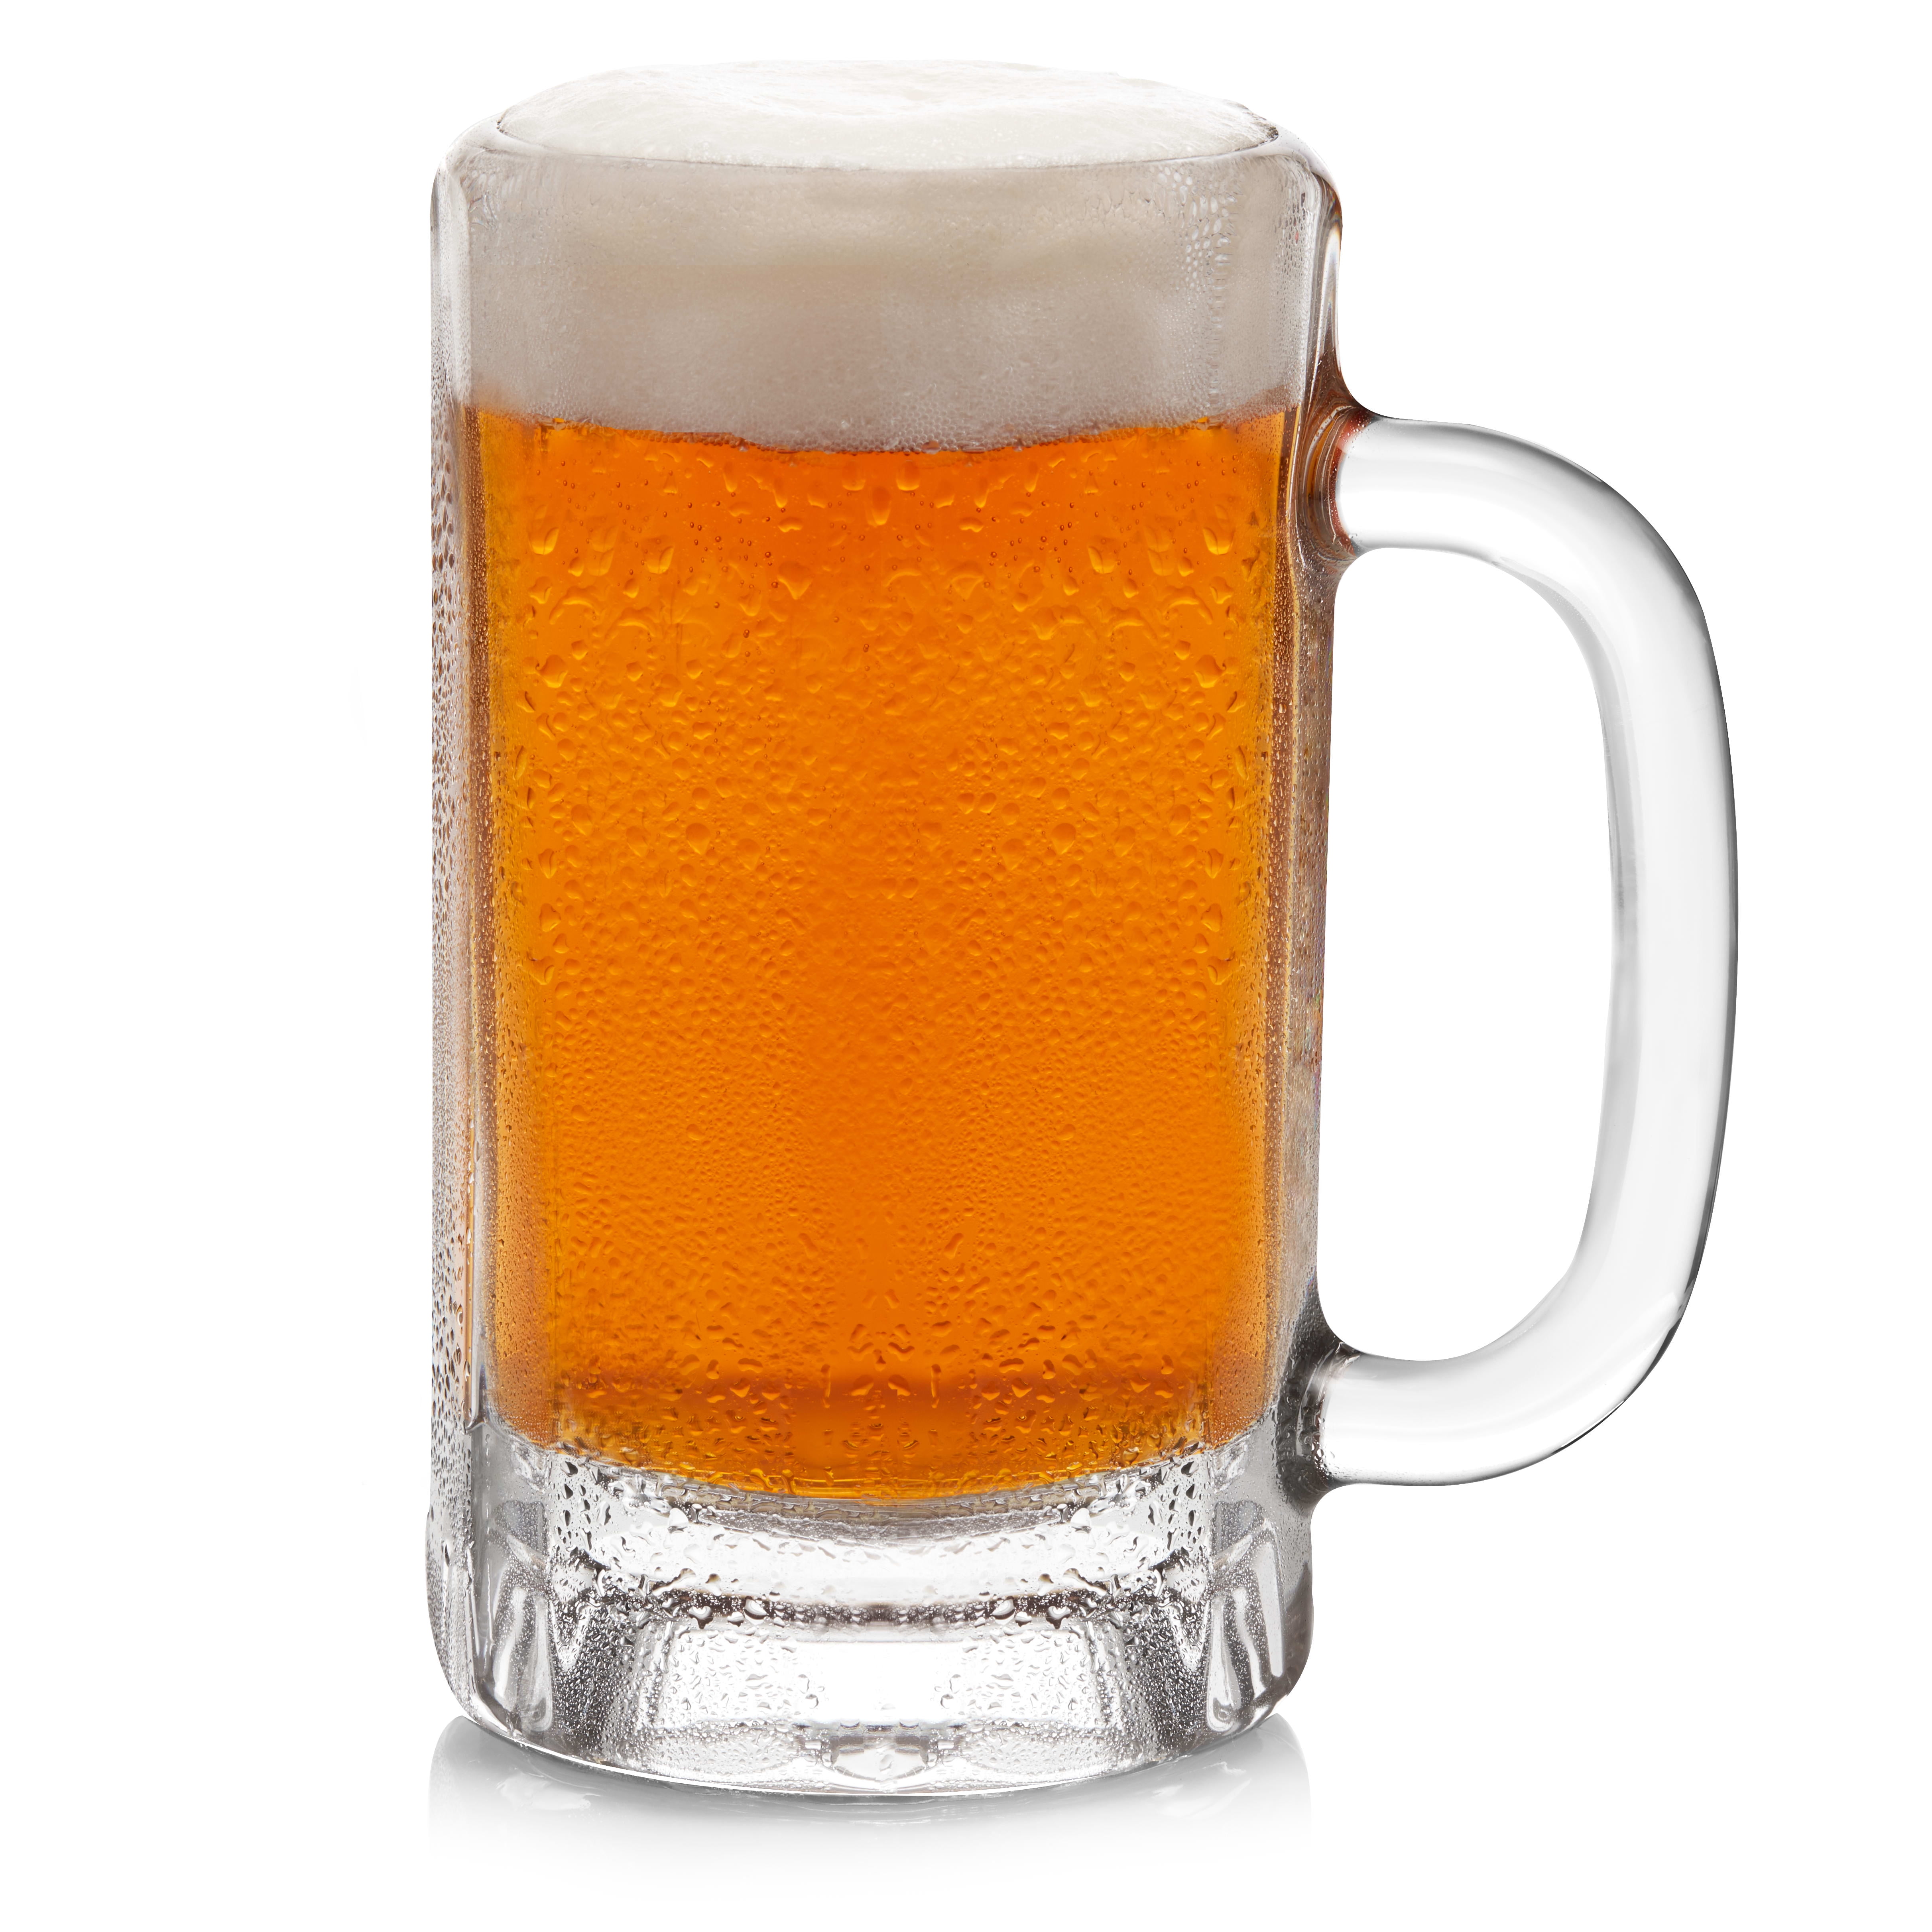 Granatan Frozen Beer Mugs For Freezer, Clear Beer Mugs Set of 2, Double  Walled Beer Mugs With Handles 16oz